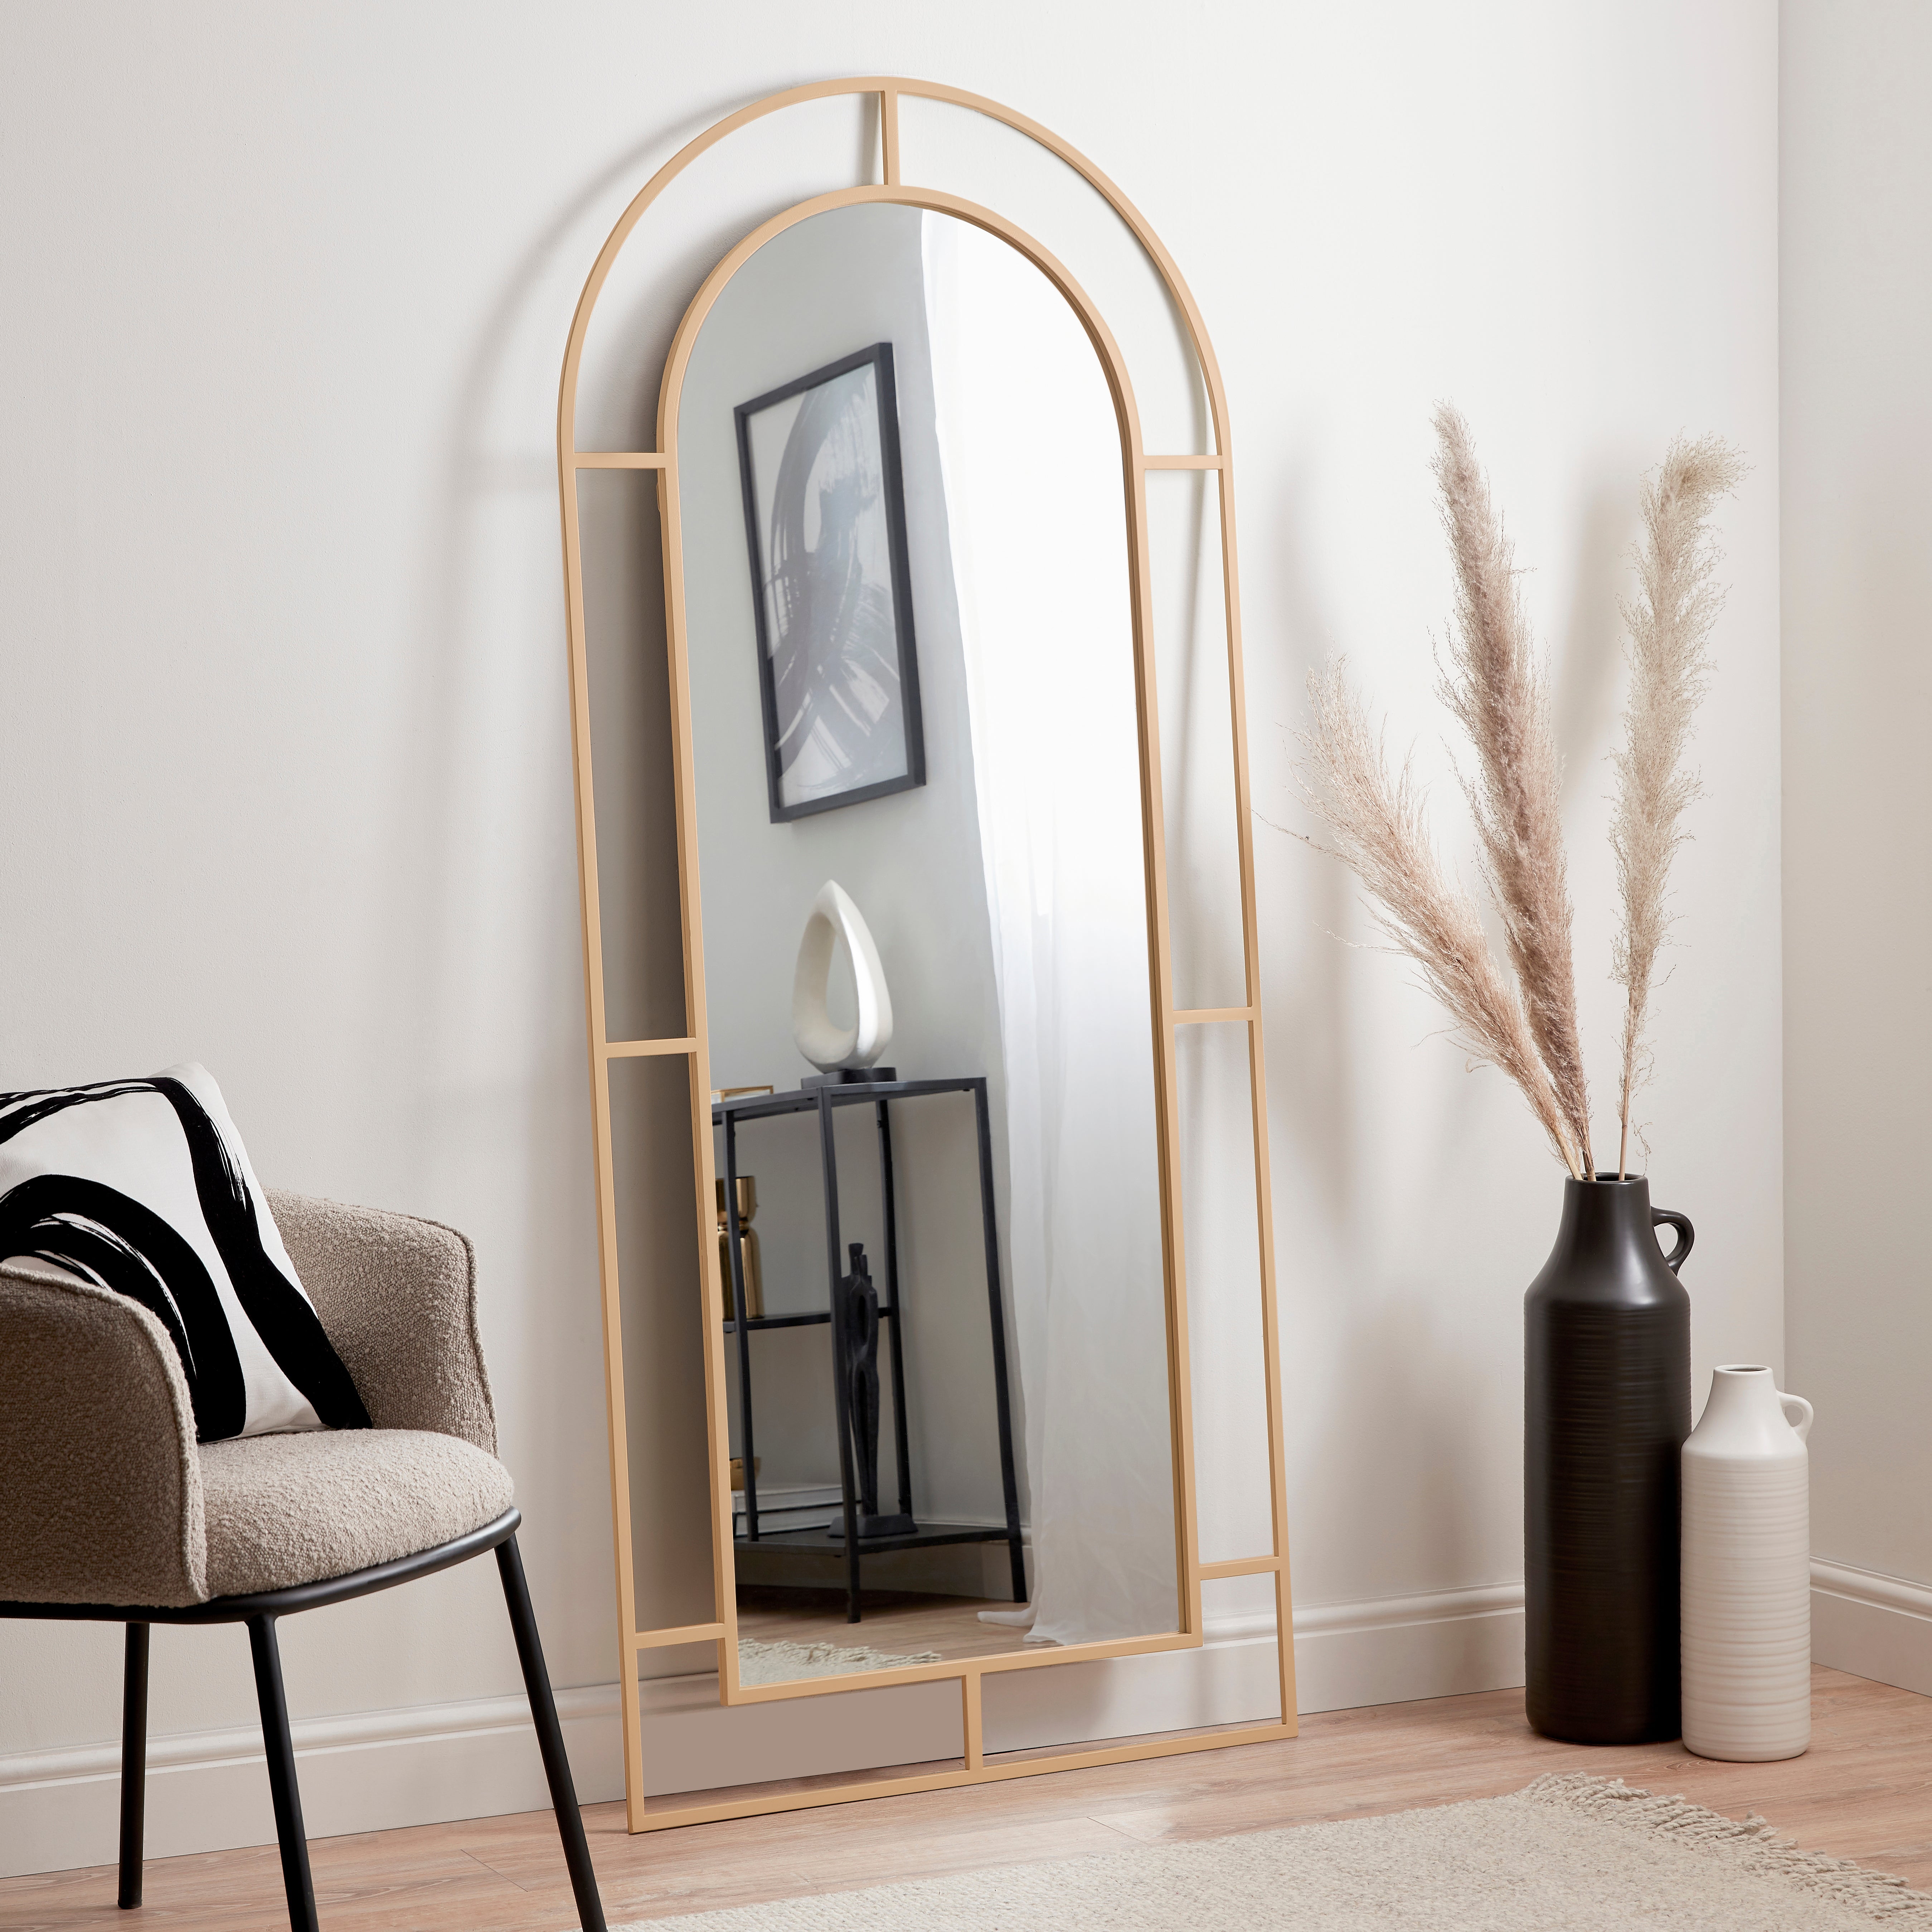 Arched Window Full Length Leaner Mirror